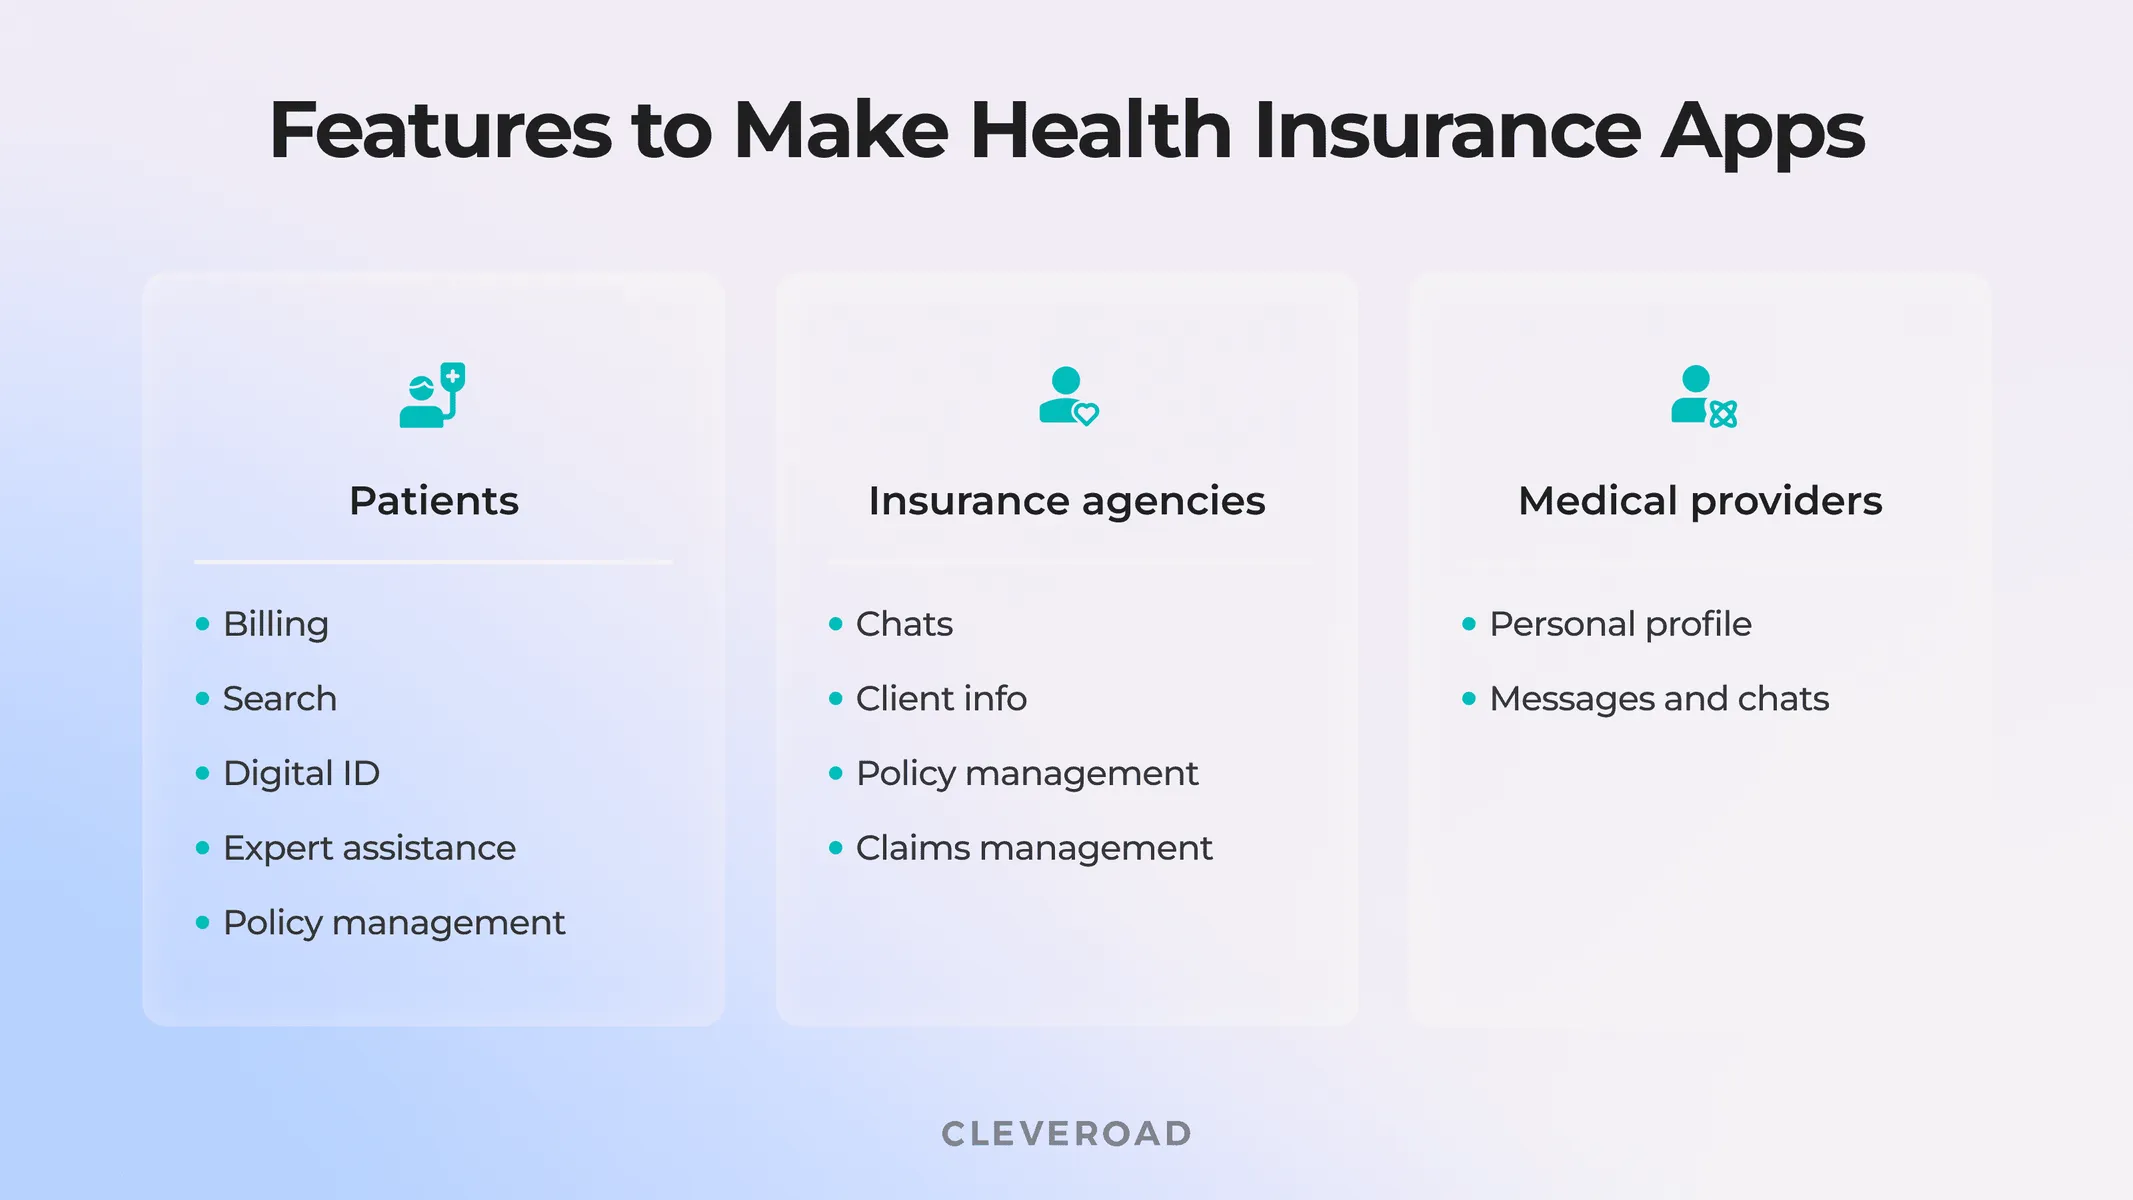 Features to build a health insurance app